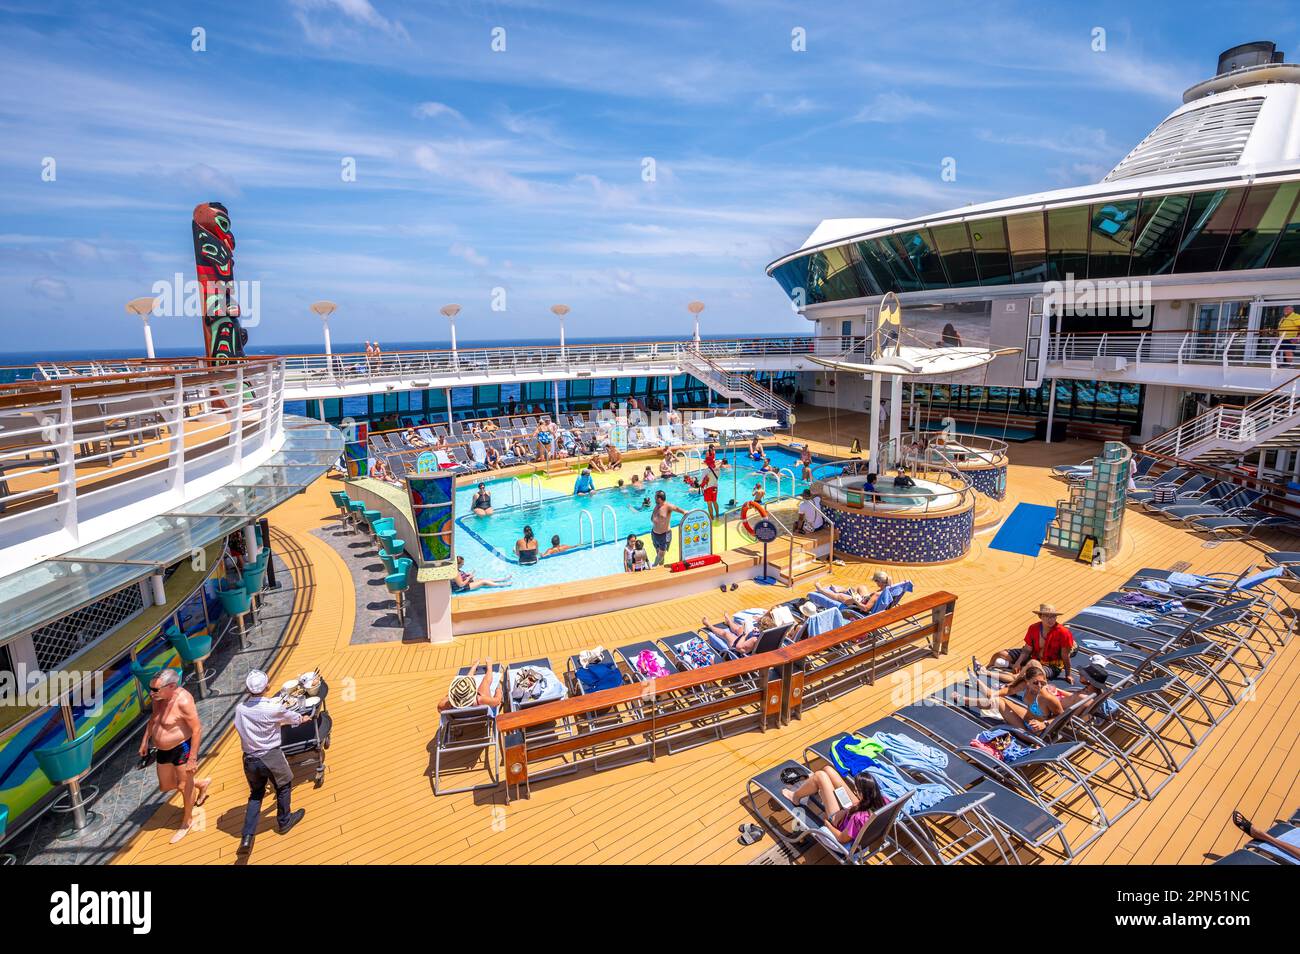 Cozumel, Mexico - April 5, 2023: View of the pool deck on the Radiance of the Seas cruise ship near Mexico. Stock Photo